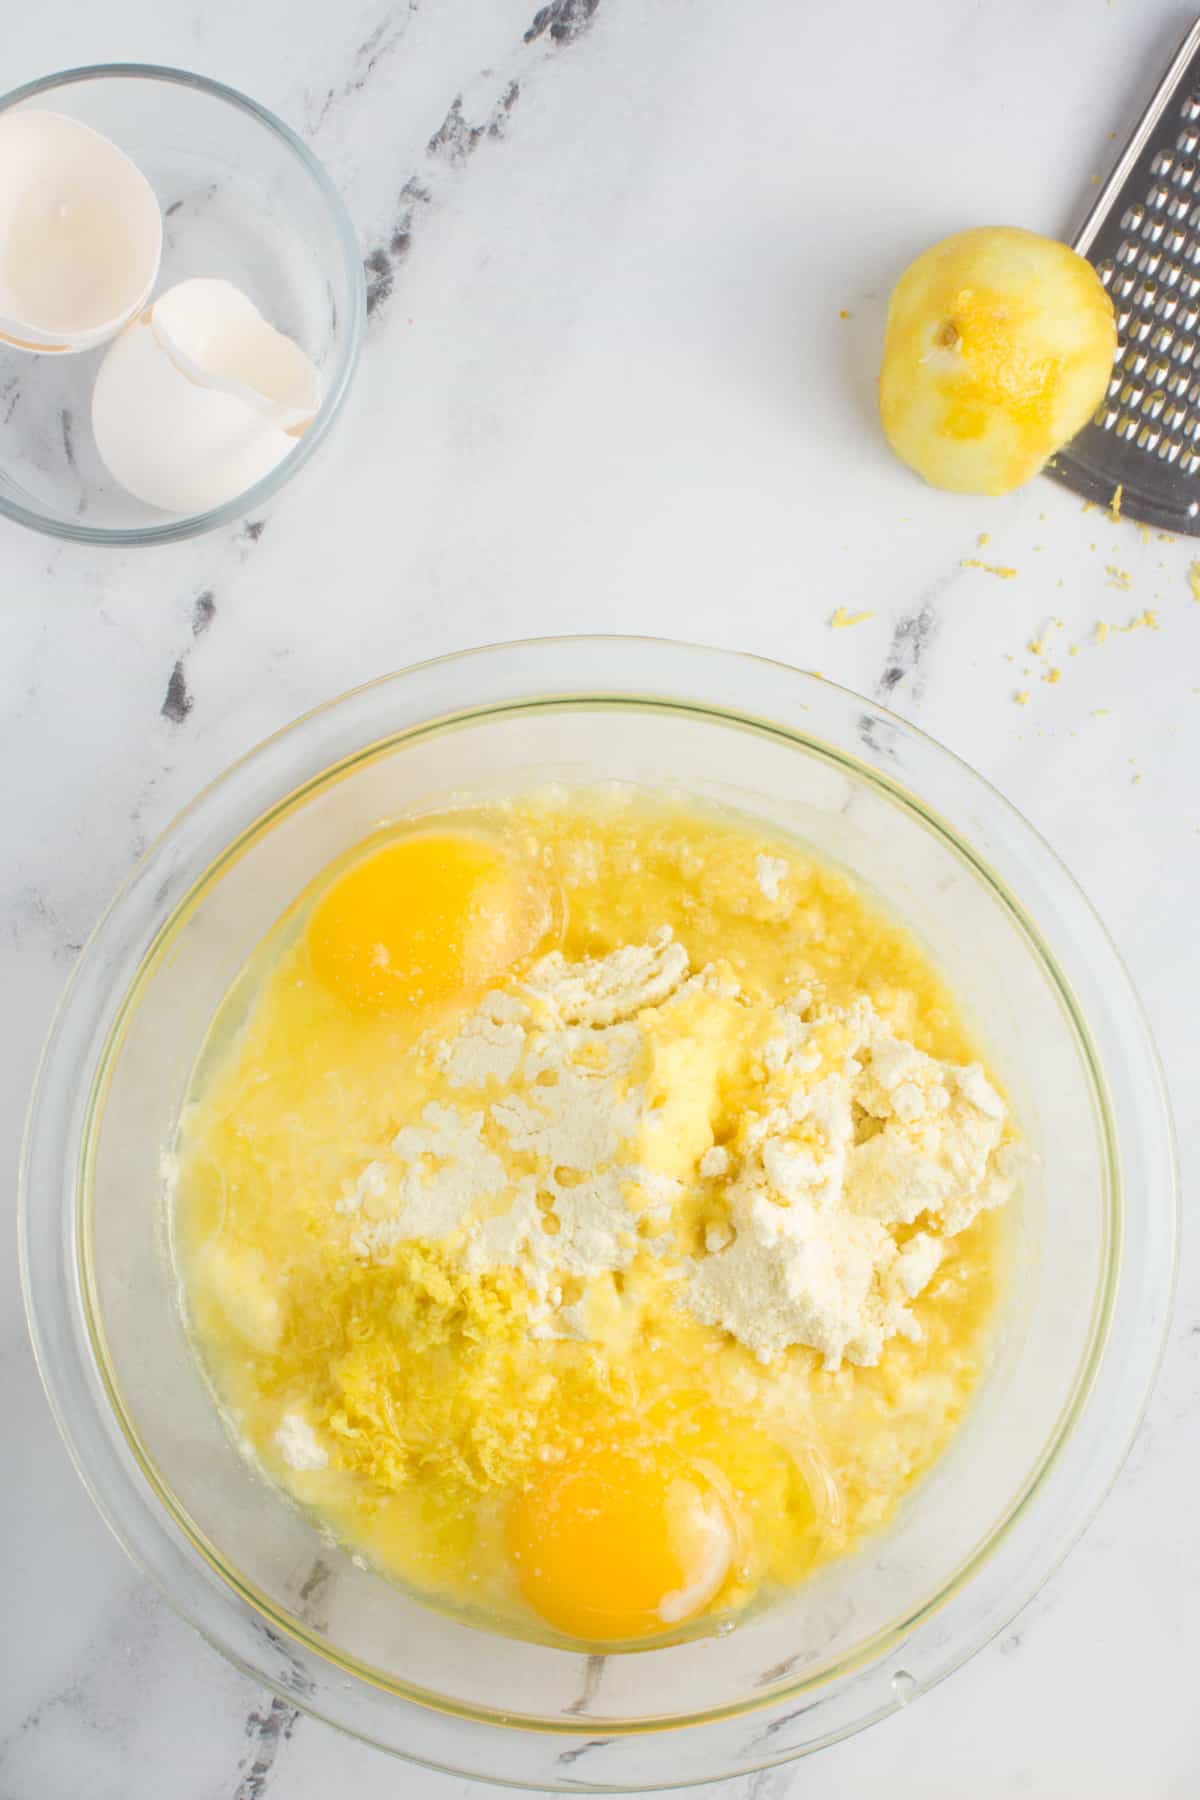 ingredients for lemon cookies in a bowl partially mixed, sitting on a counter top with lemons, a grater, and empty egg shells around it.